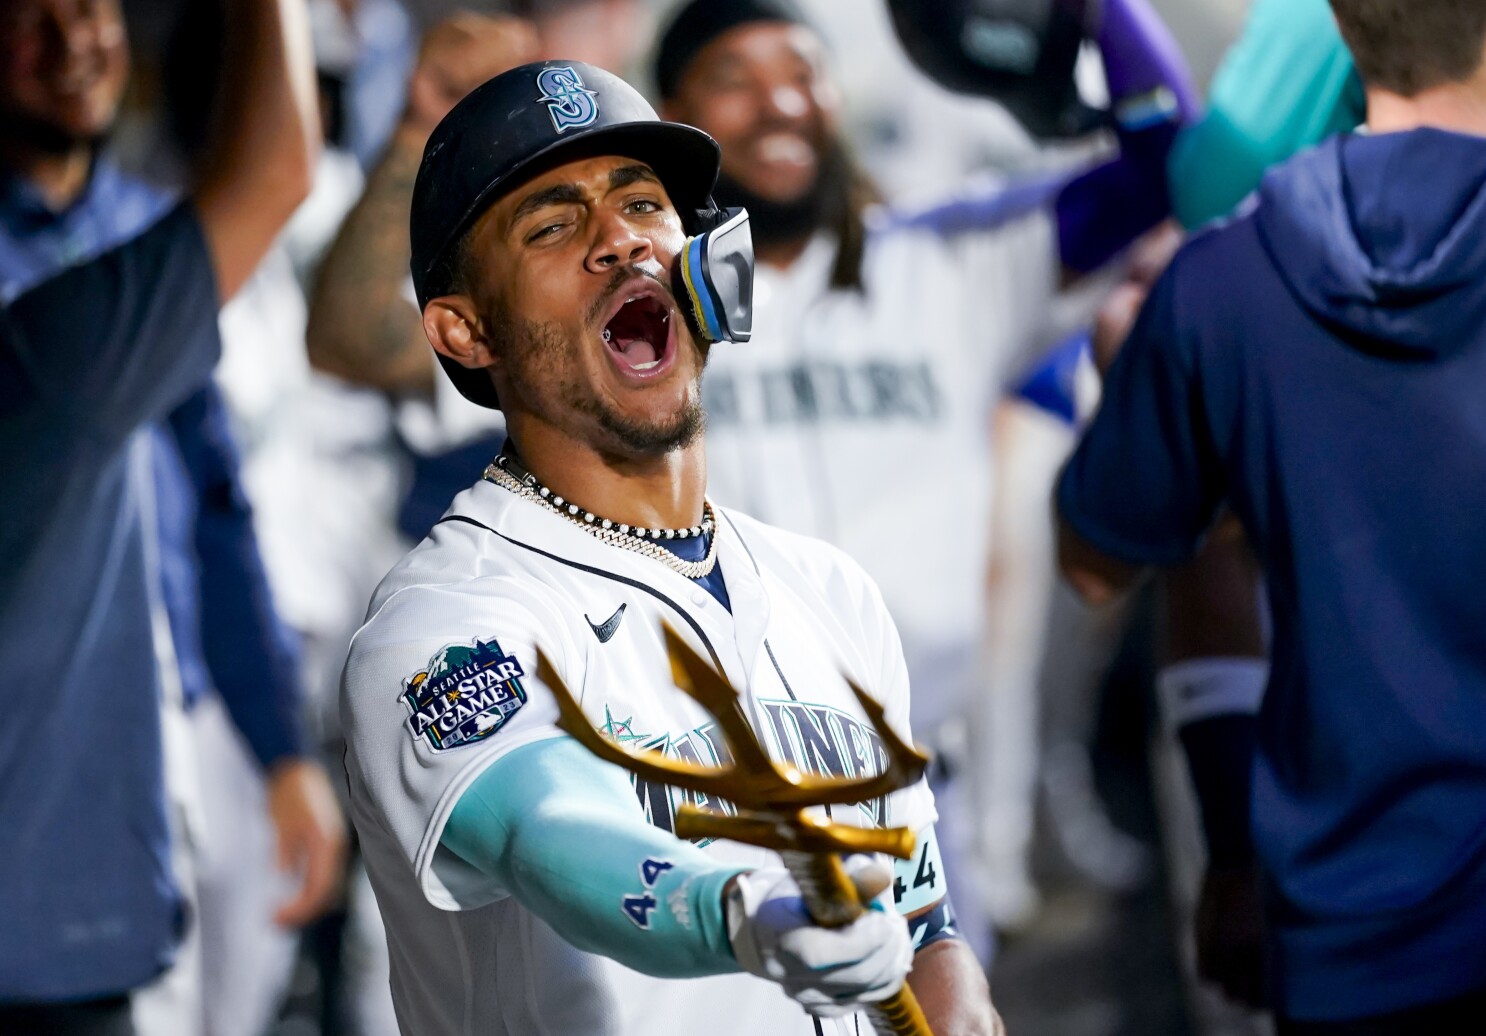 Mariners show off new uniforms, but they don't help them beat